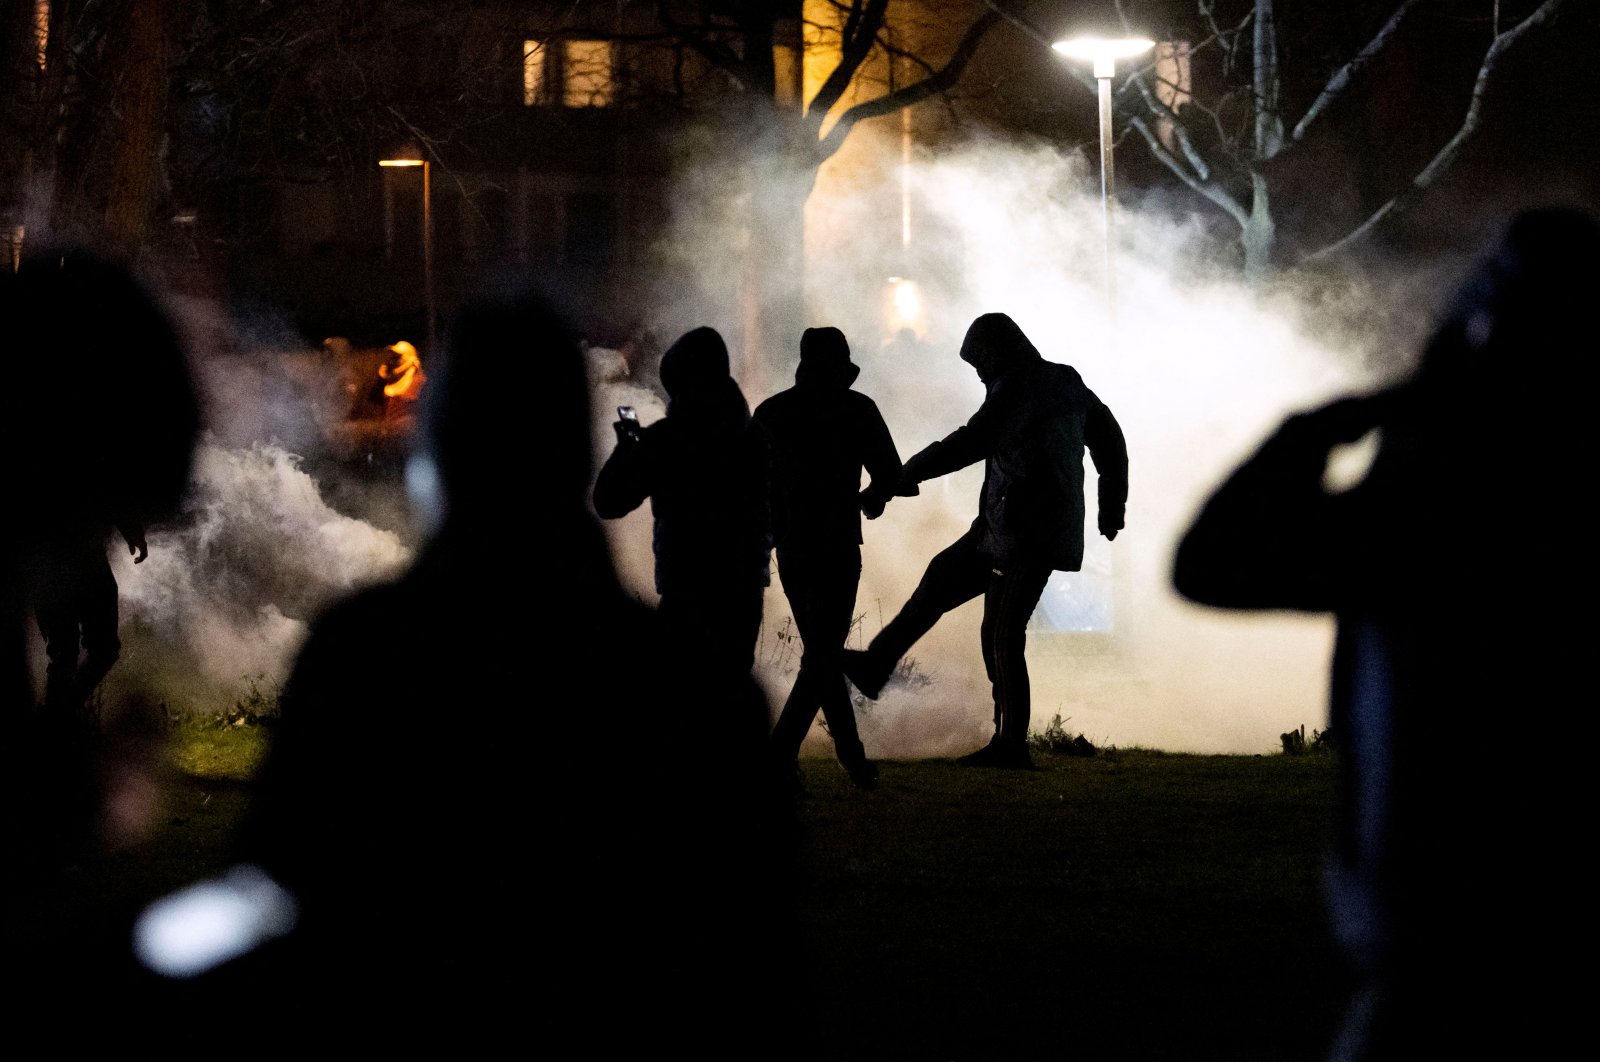 Protesters stand amid tear gas fired by the police in Rosengard district, following Quran burnings that caused riots in several Swedish towns over the Easter weekend, Malmo, Sweden, April 18, 2022. (Reuters Photo)